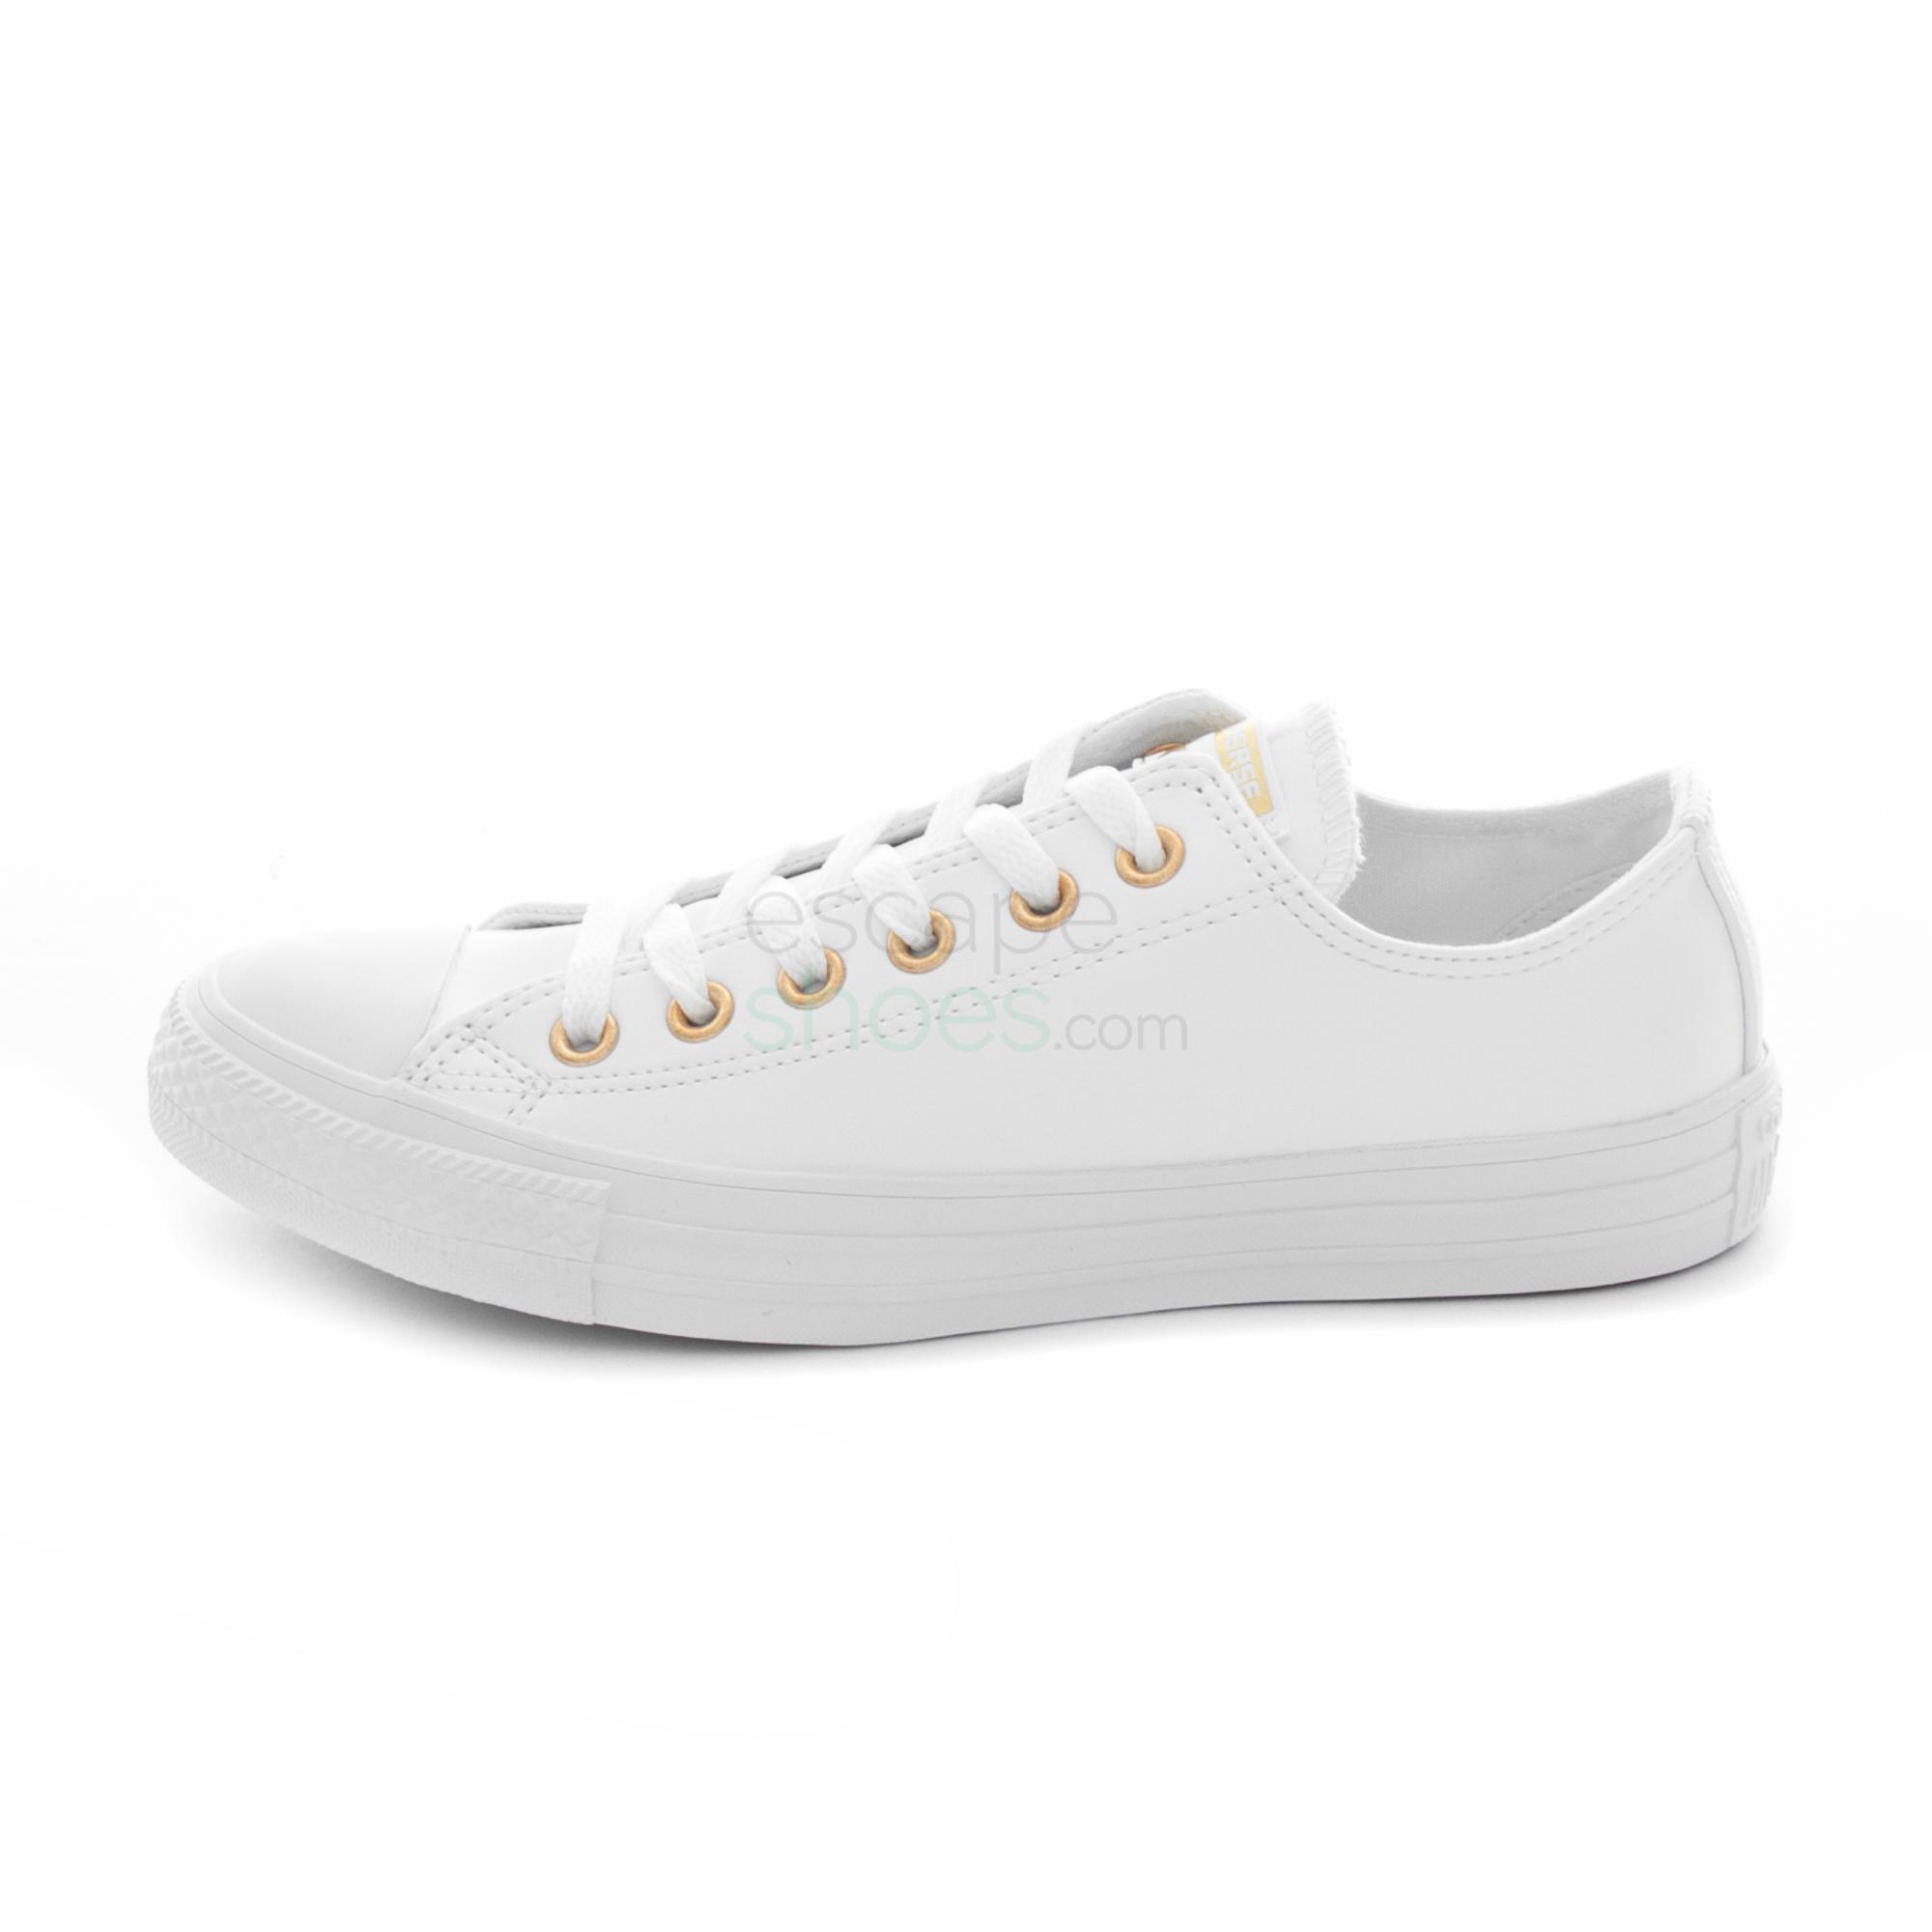 white and gold all star converse